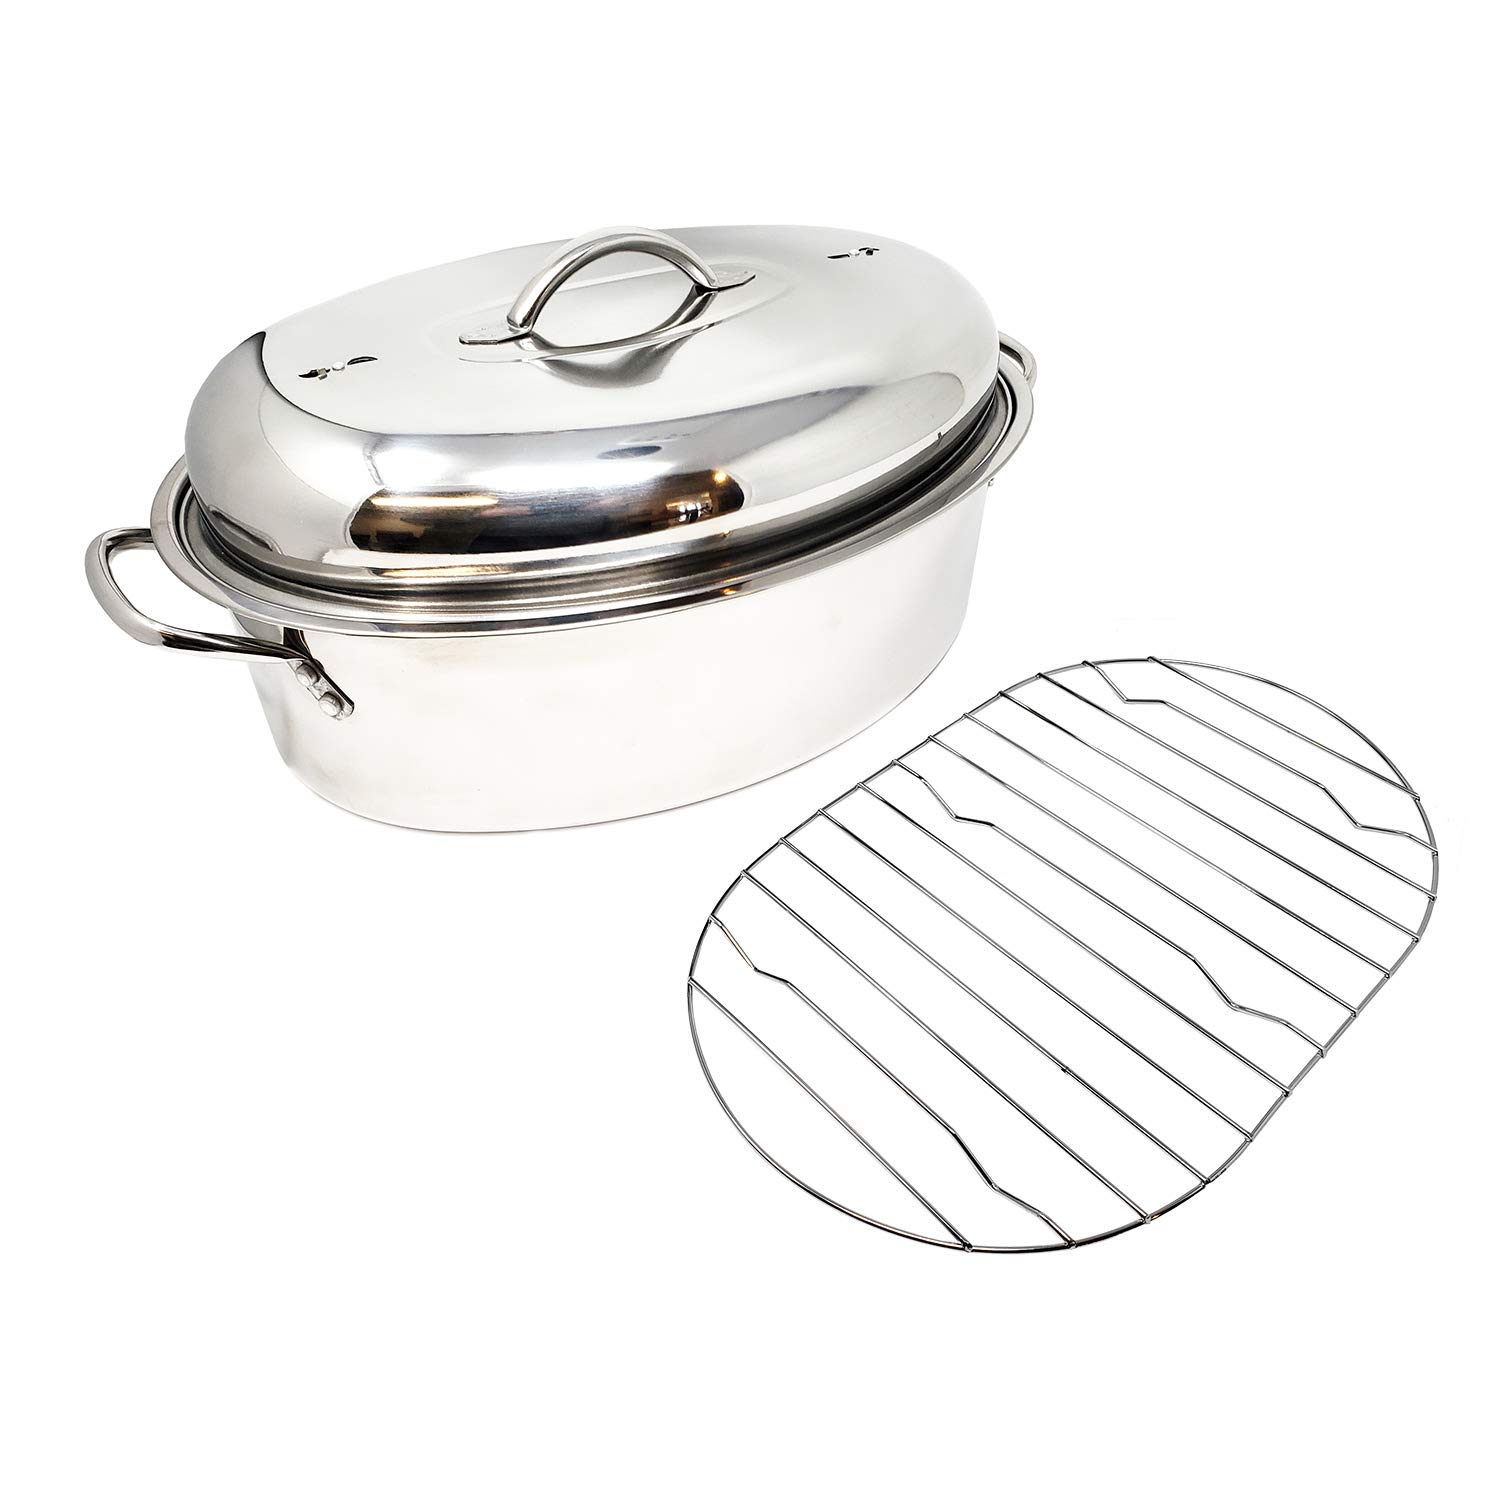 lavo home Stainless Steel Oval Lidded Roaster Pan Extra Large & Lightweight With Lid & Wire Rack Multi-Purpose Oven cookware High Dome M